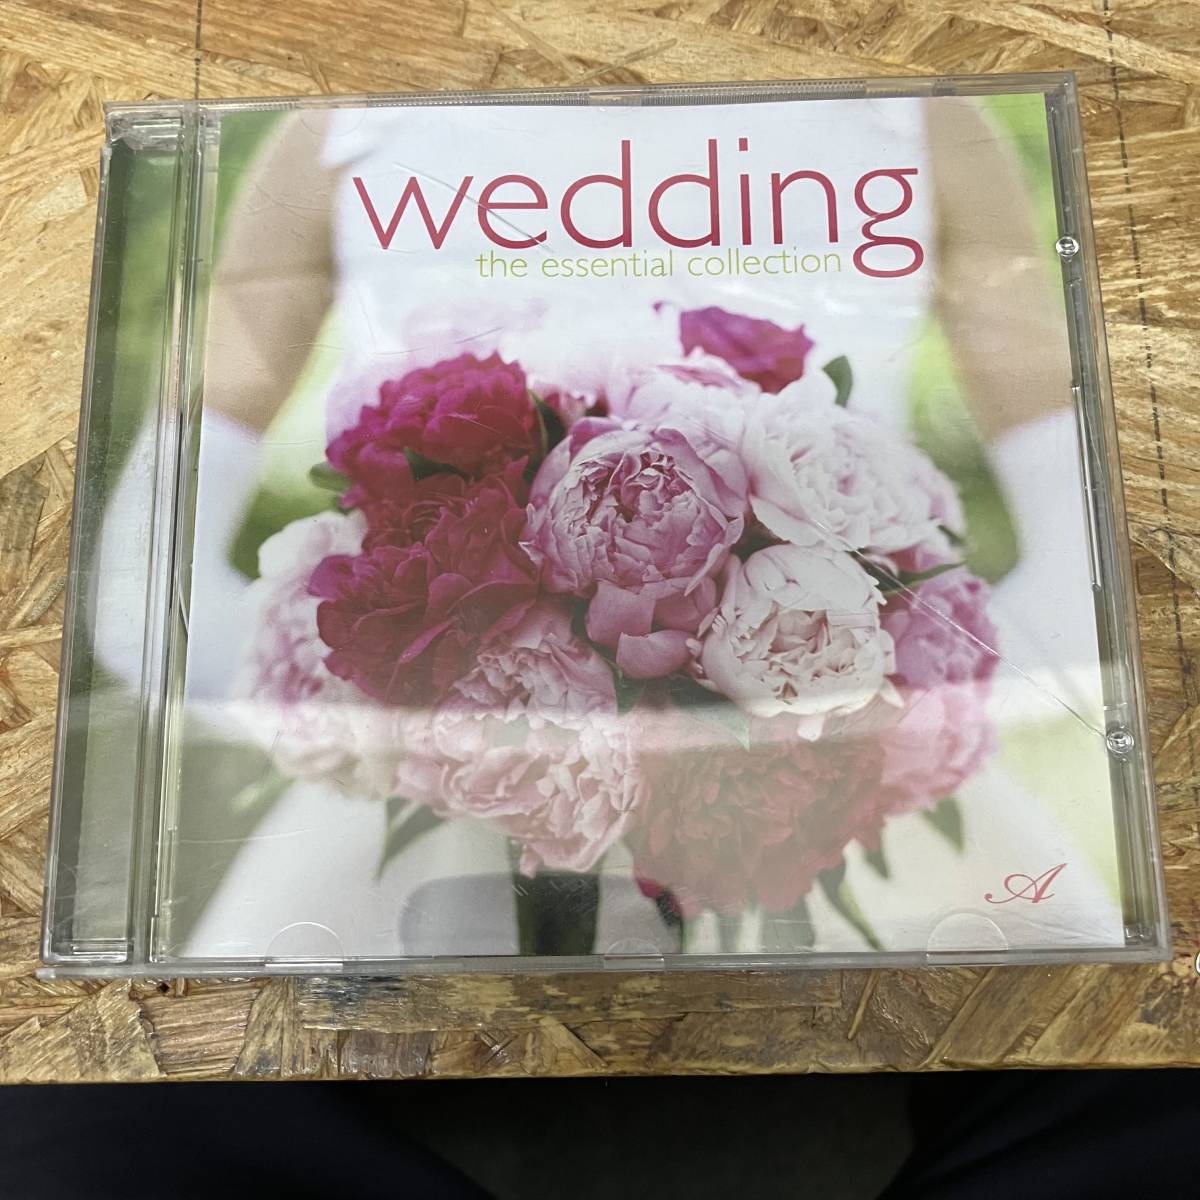 ● POPS,ROCK WEDDING THE ESSENTIAL COLLECTION アルバム,INDIE CD 中古品_画像1